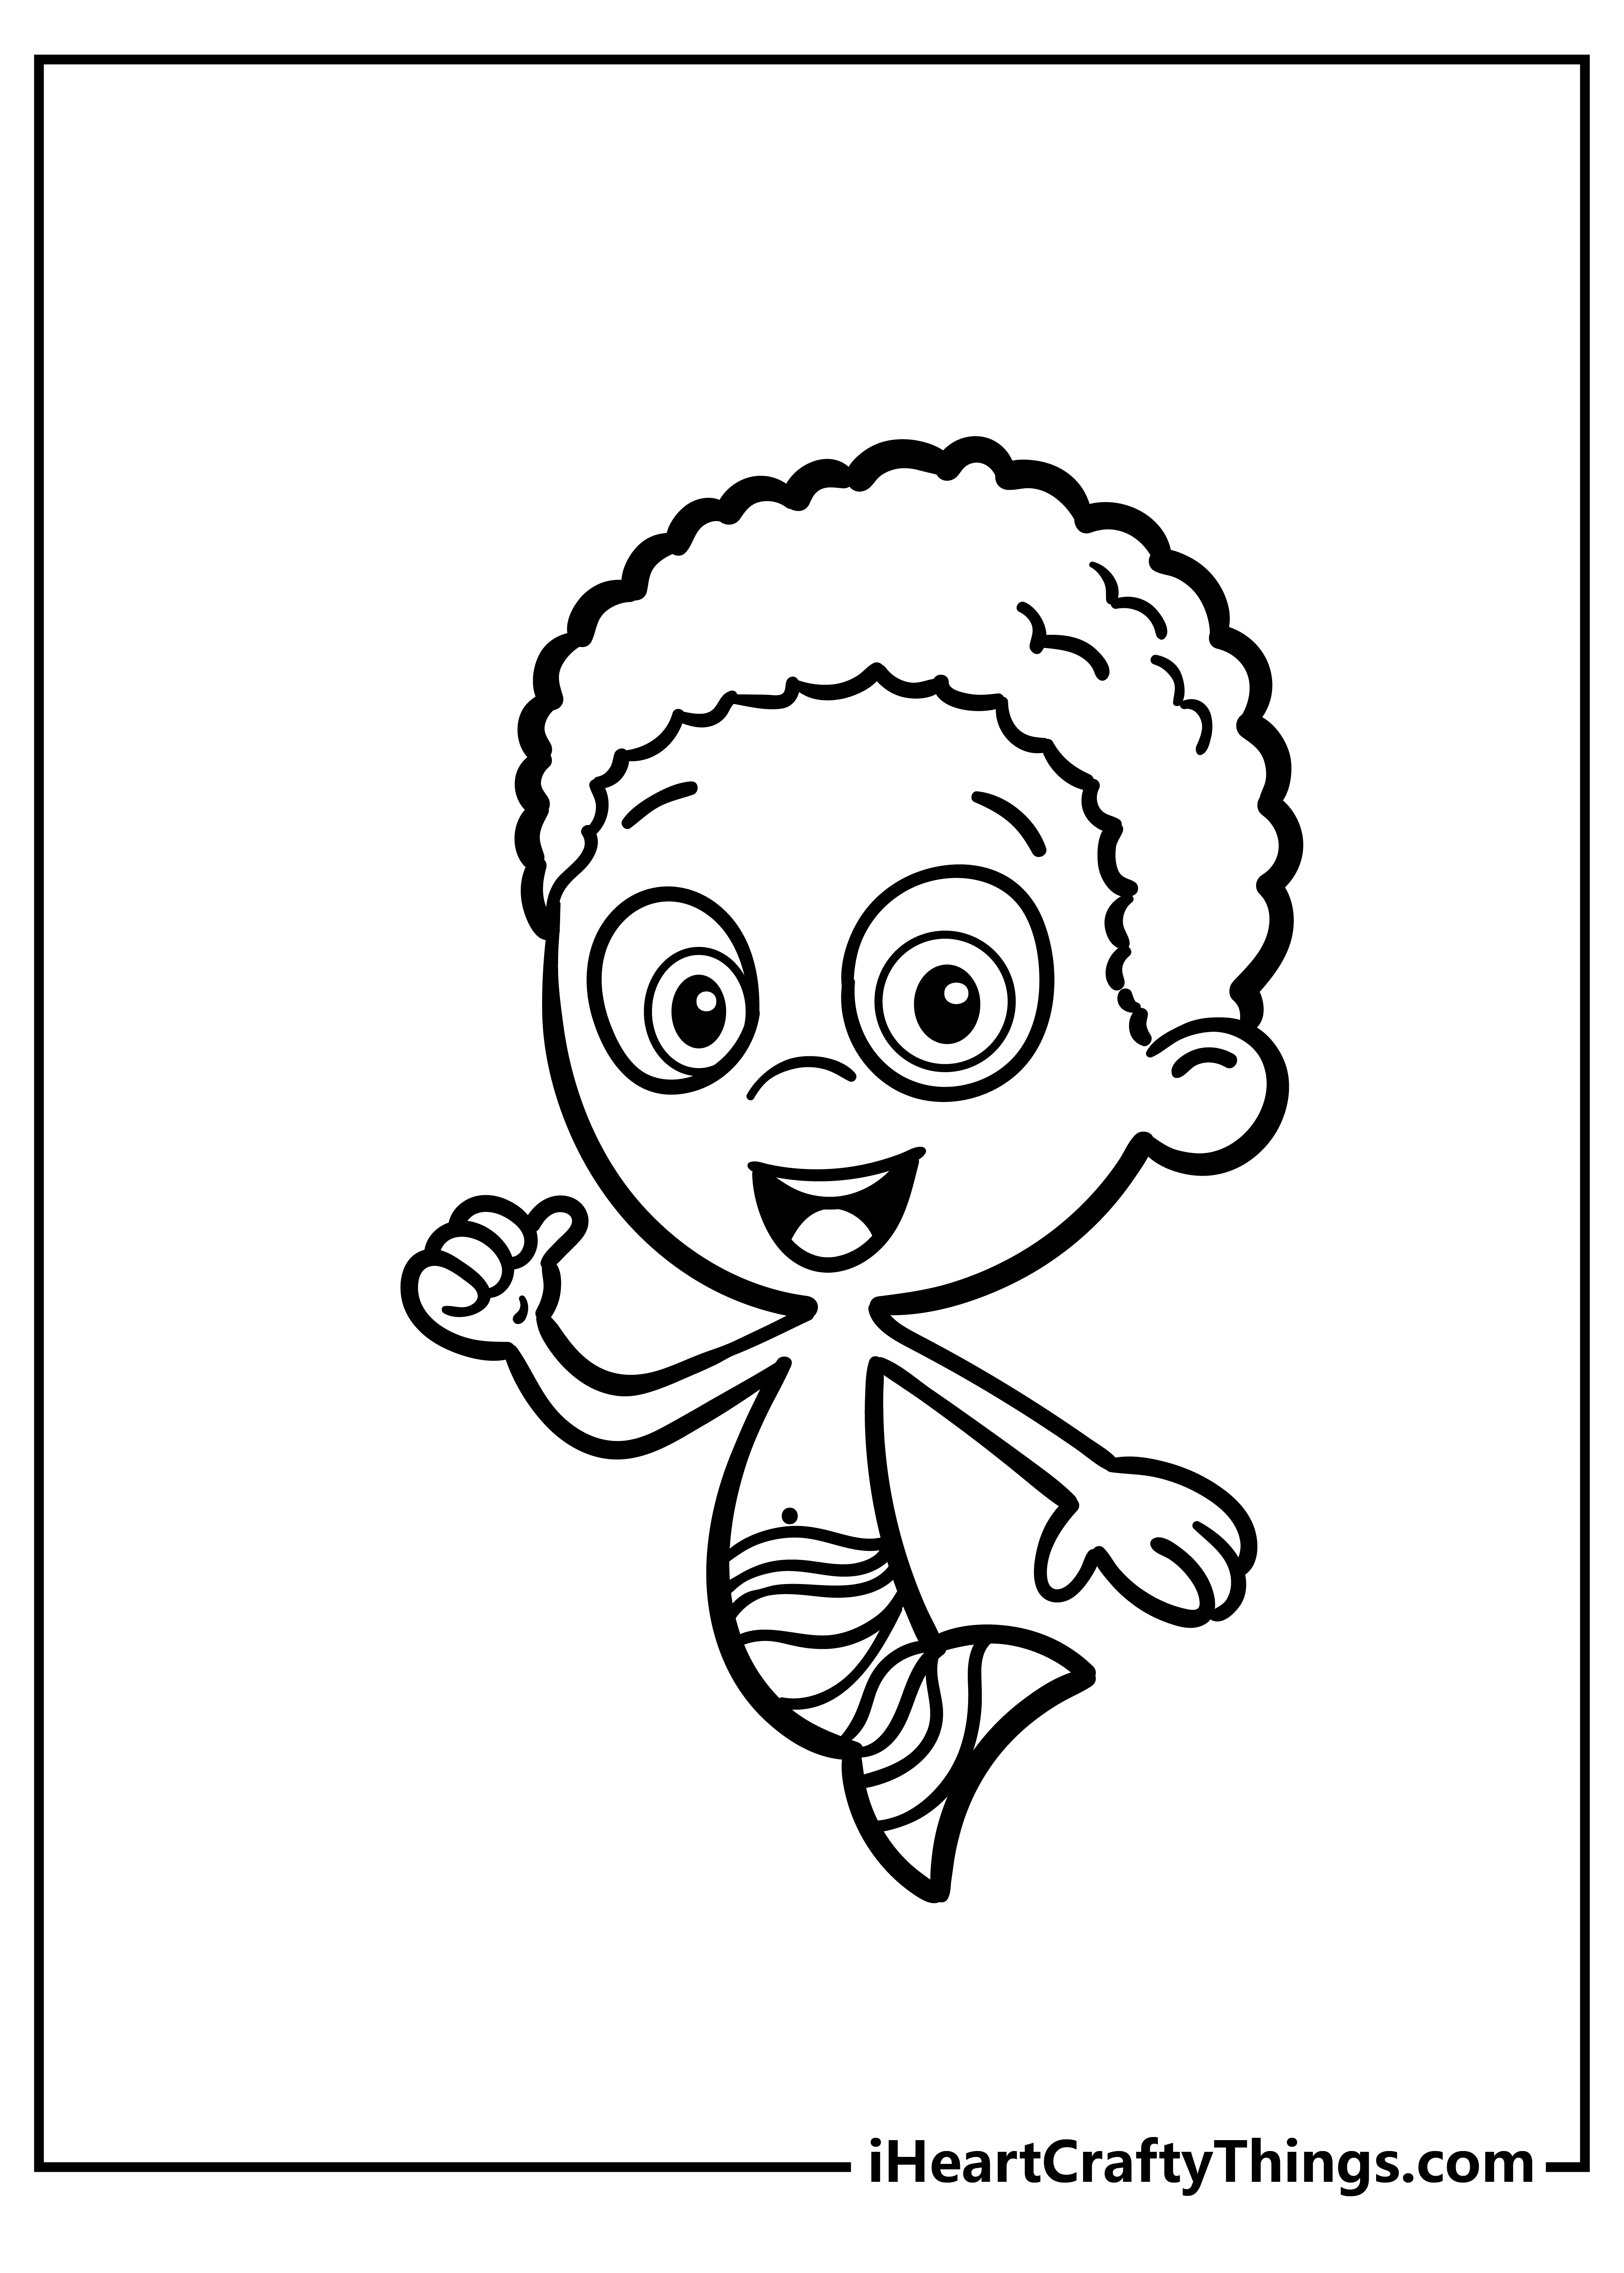 Bubble Guppies Coloring Sheet for children free download